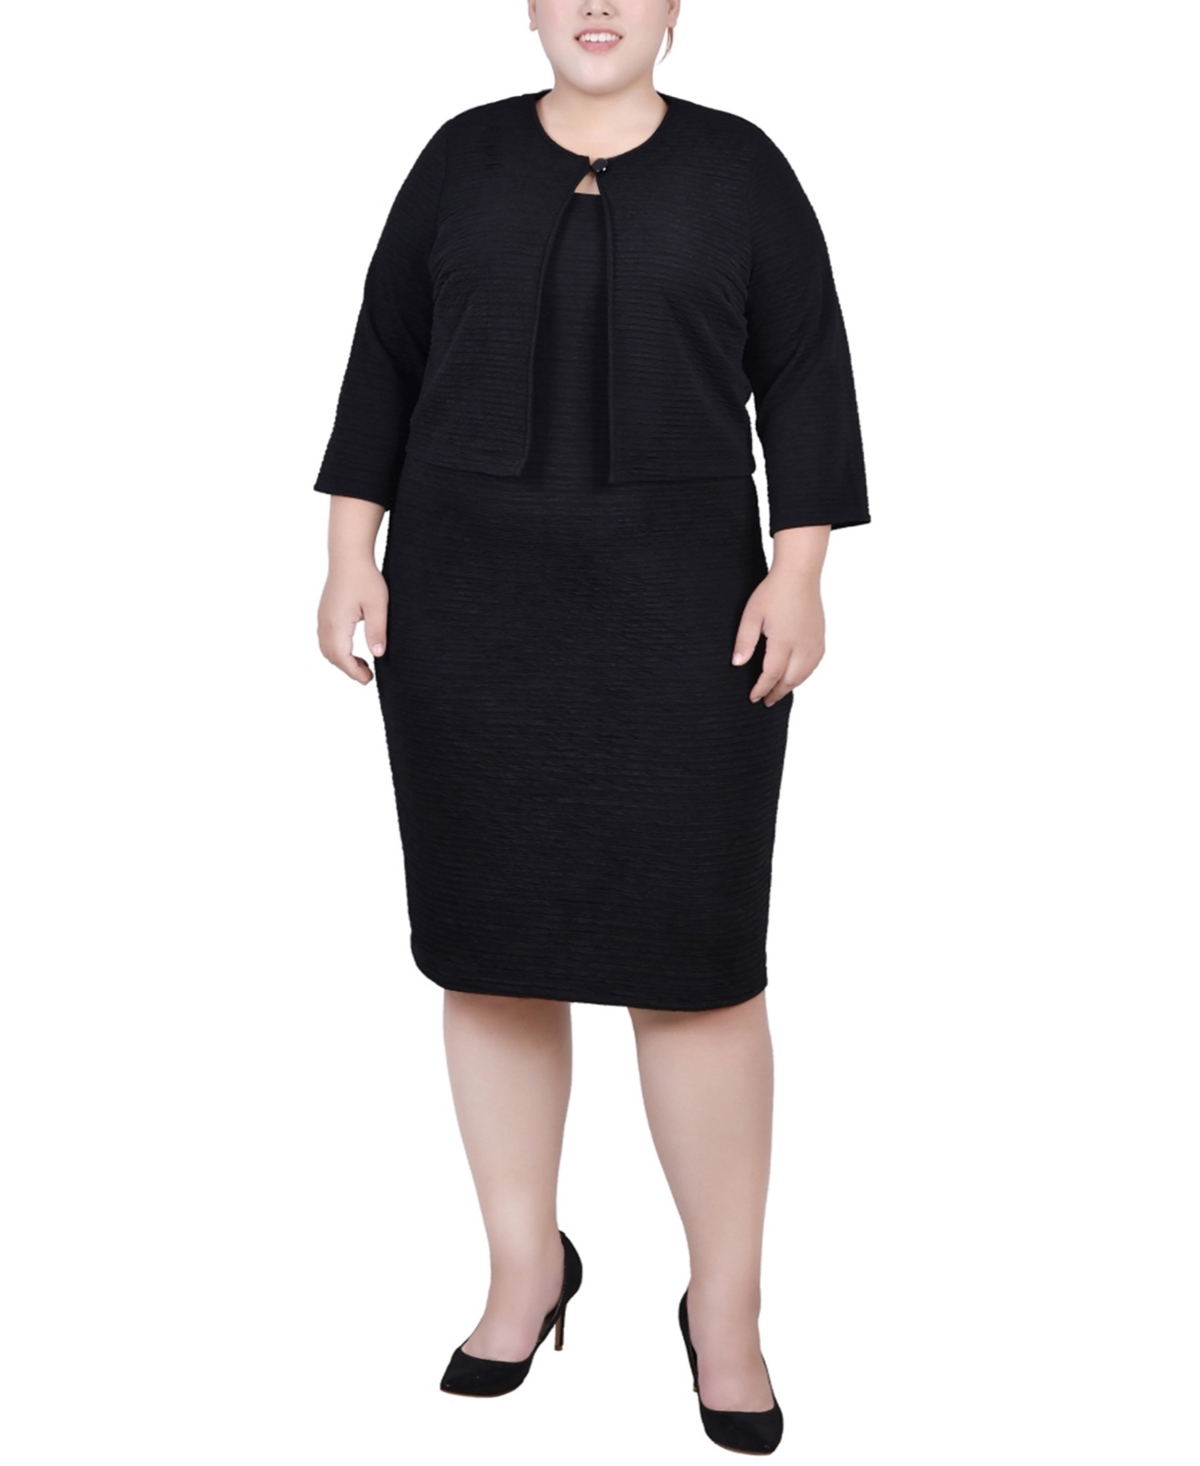 NY COLLECTION PLUS SIZE TEXTURED 3/4 SLEEVE TWO PIECE DRESS SET